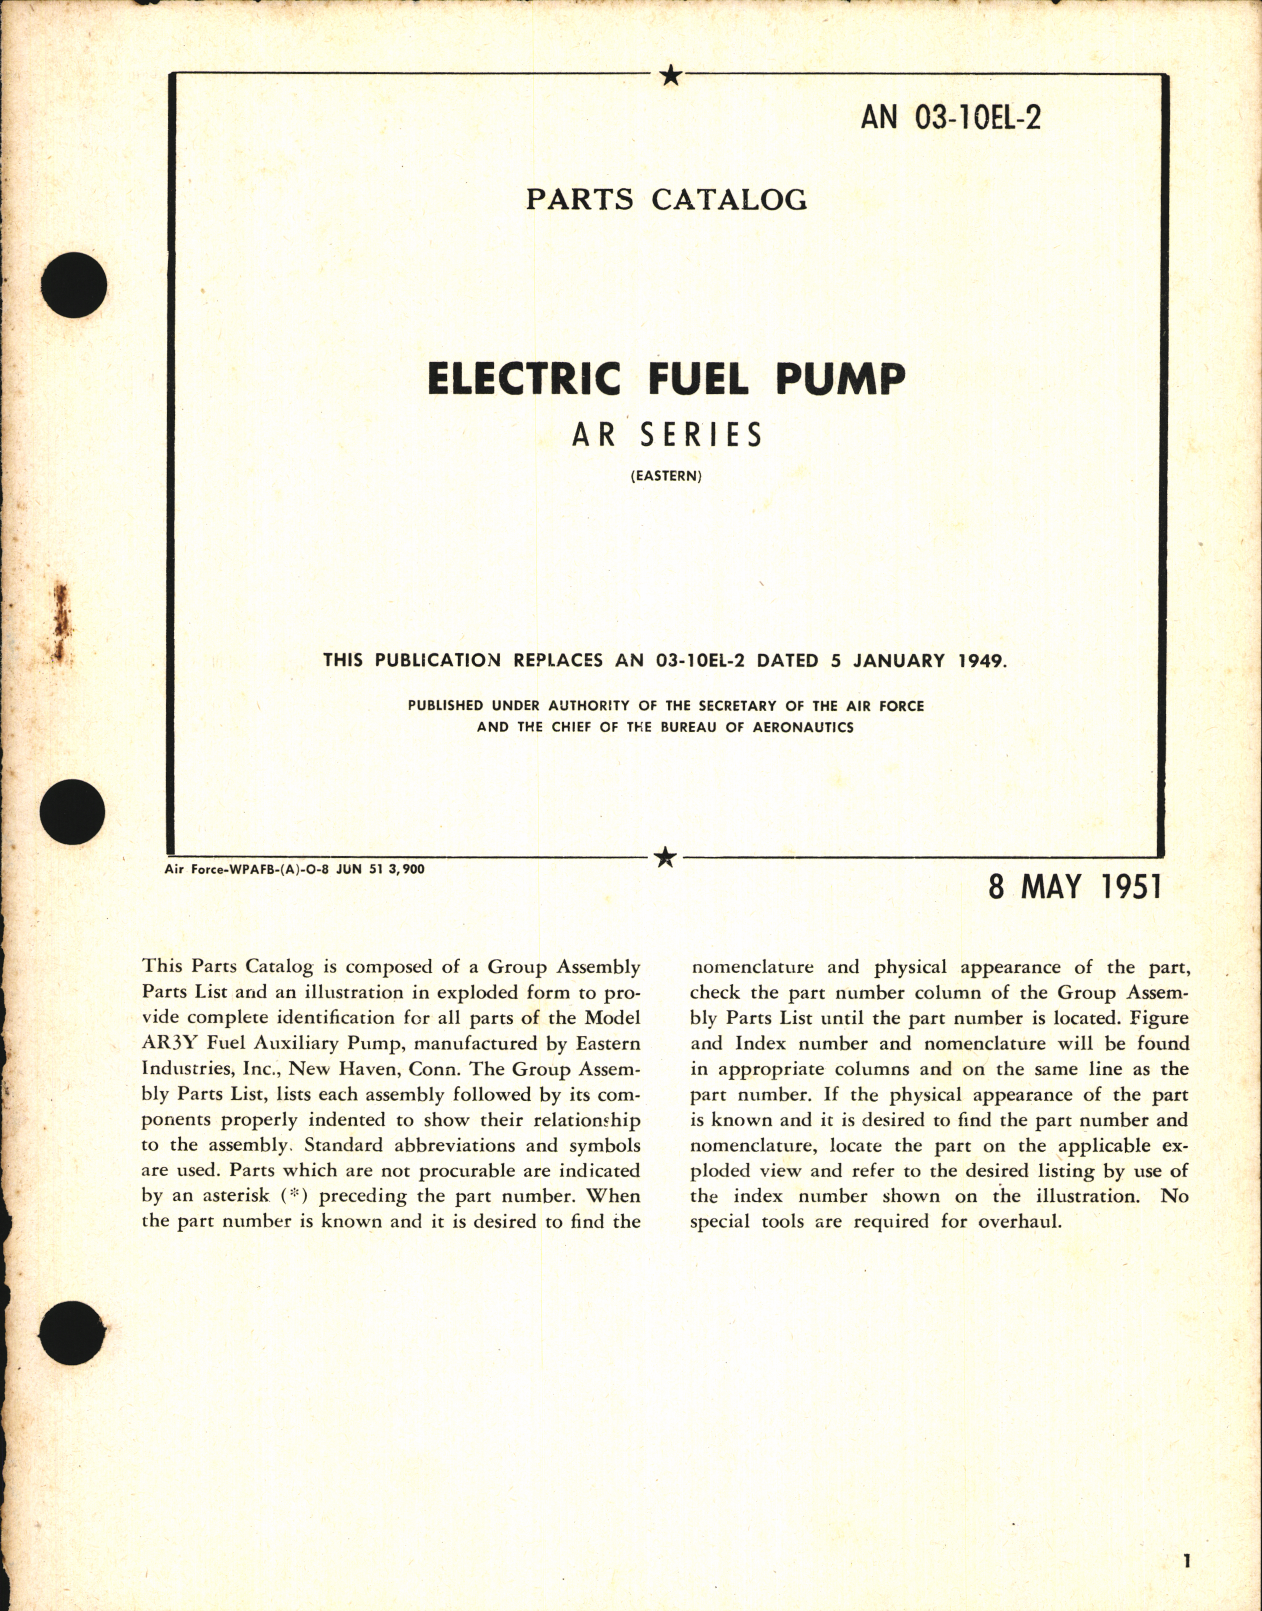 Sample page 1 from AirCorps Library document: Parts Catalog for Electric Fuel Pump AR Series